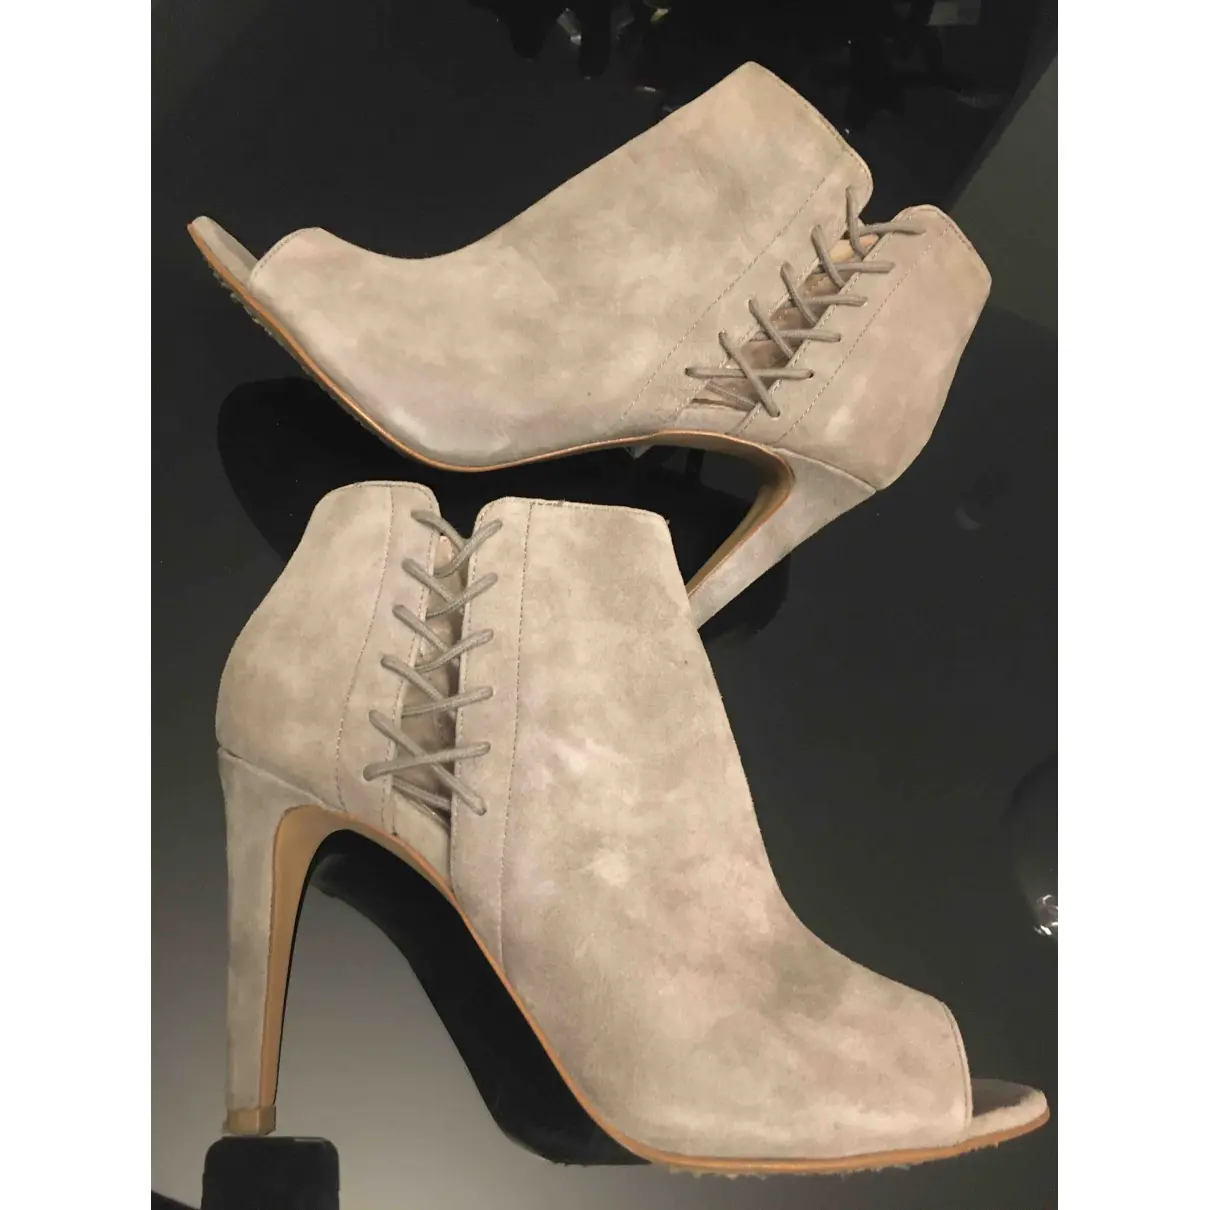 Buy French Connection Heels online